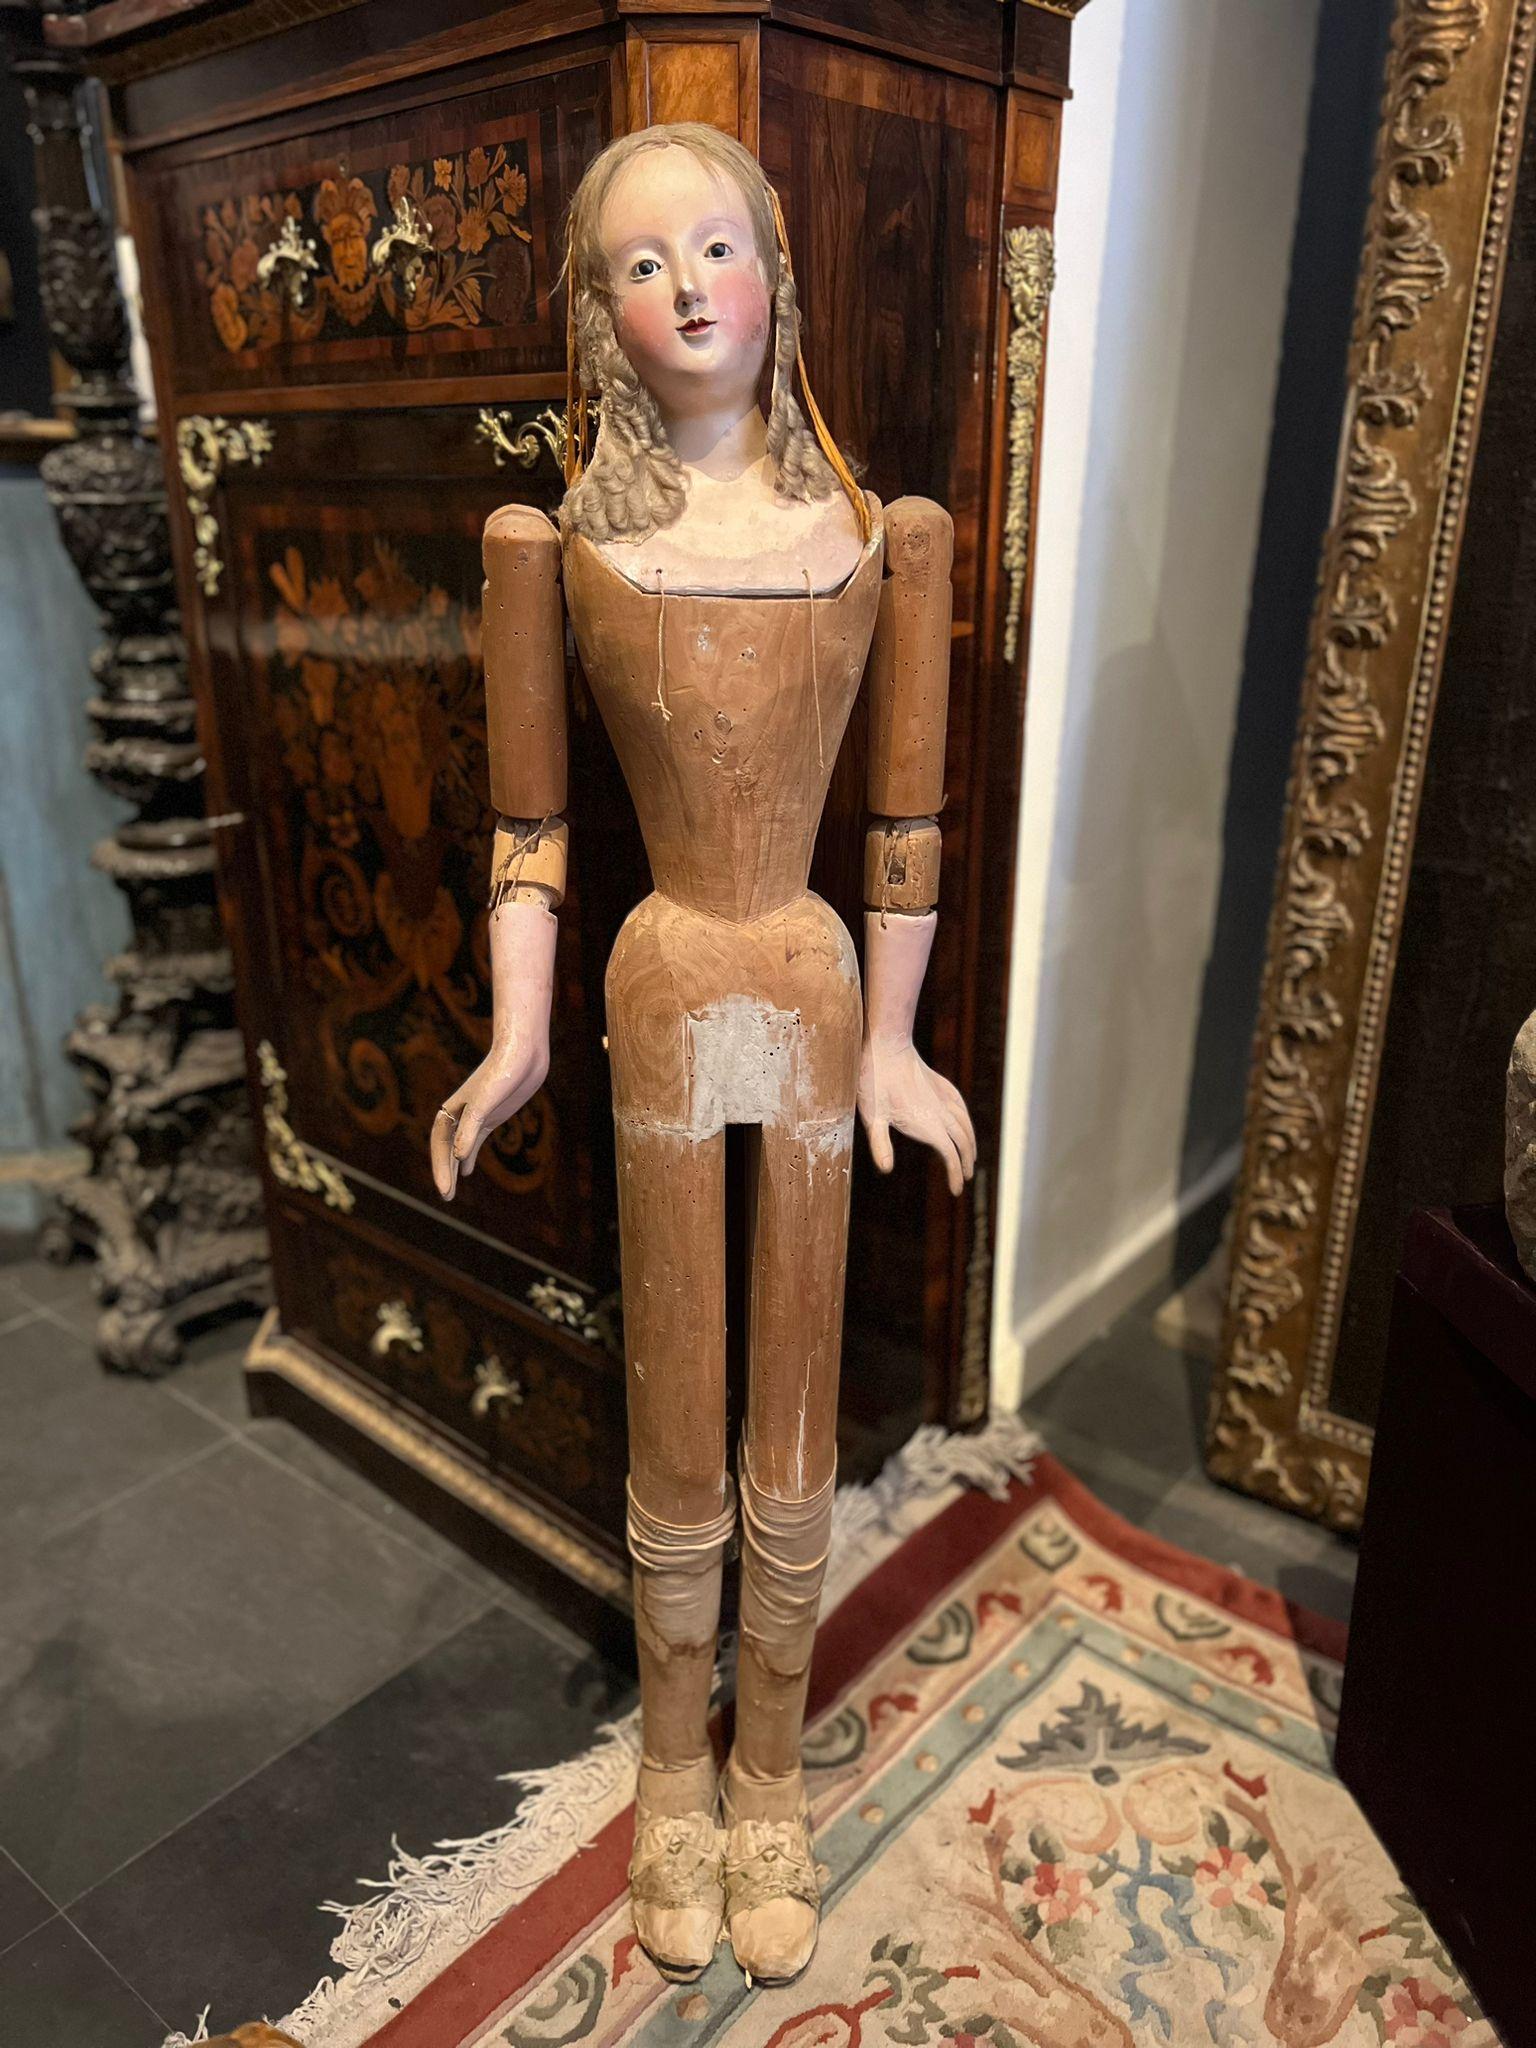 The mannequin has movable upper limbs and has original shoes and socks, papier-mâché hands and head. The painting of the facial features is extremely refined. Italy, 18th century.

Contact for the price and for any other information I am at your